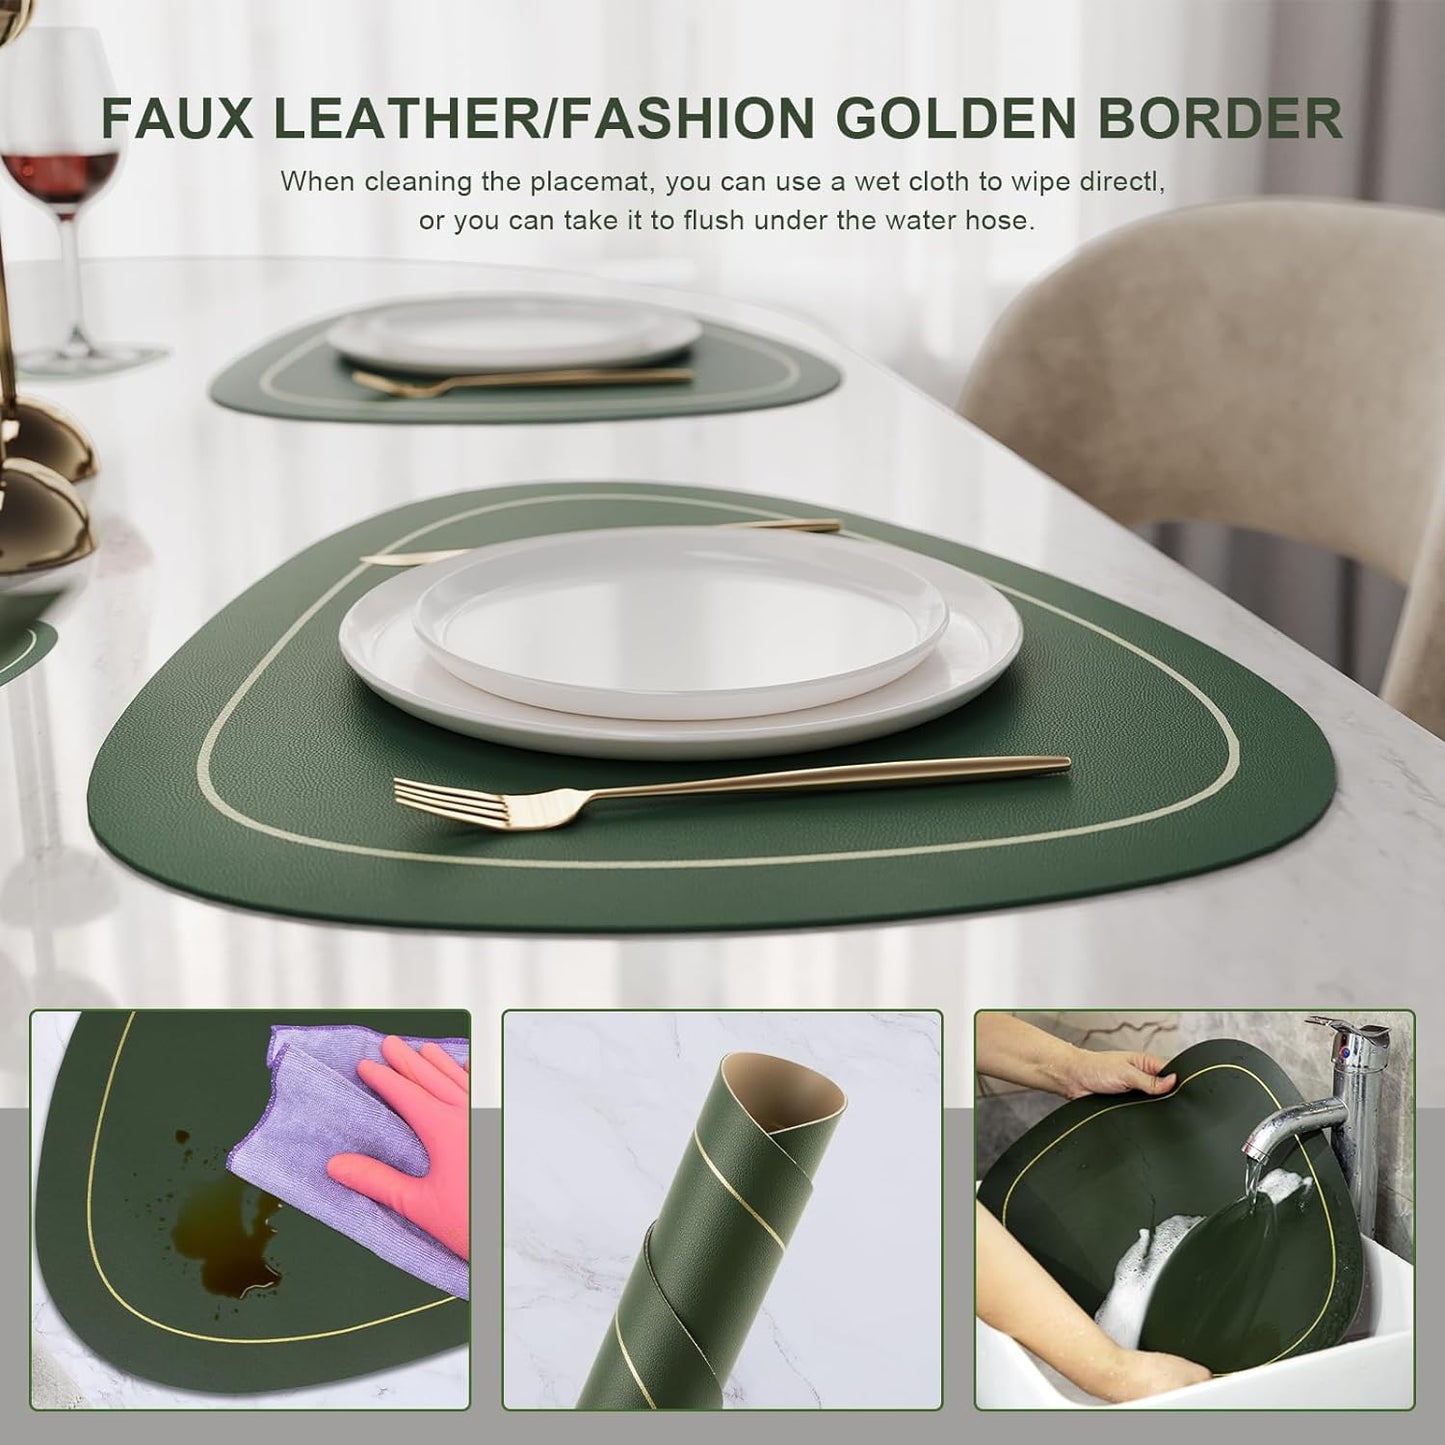 Double-Sided Leather Placemats Set of 6 Washable Heat Resistant Placemats with Coasters Waterproof Oil-Proof Wipeable Place Mats for Kitchen Table Dining Patio Indoor Outdoor Table Mats-Green